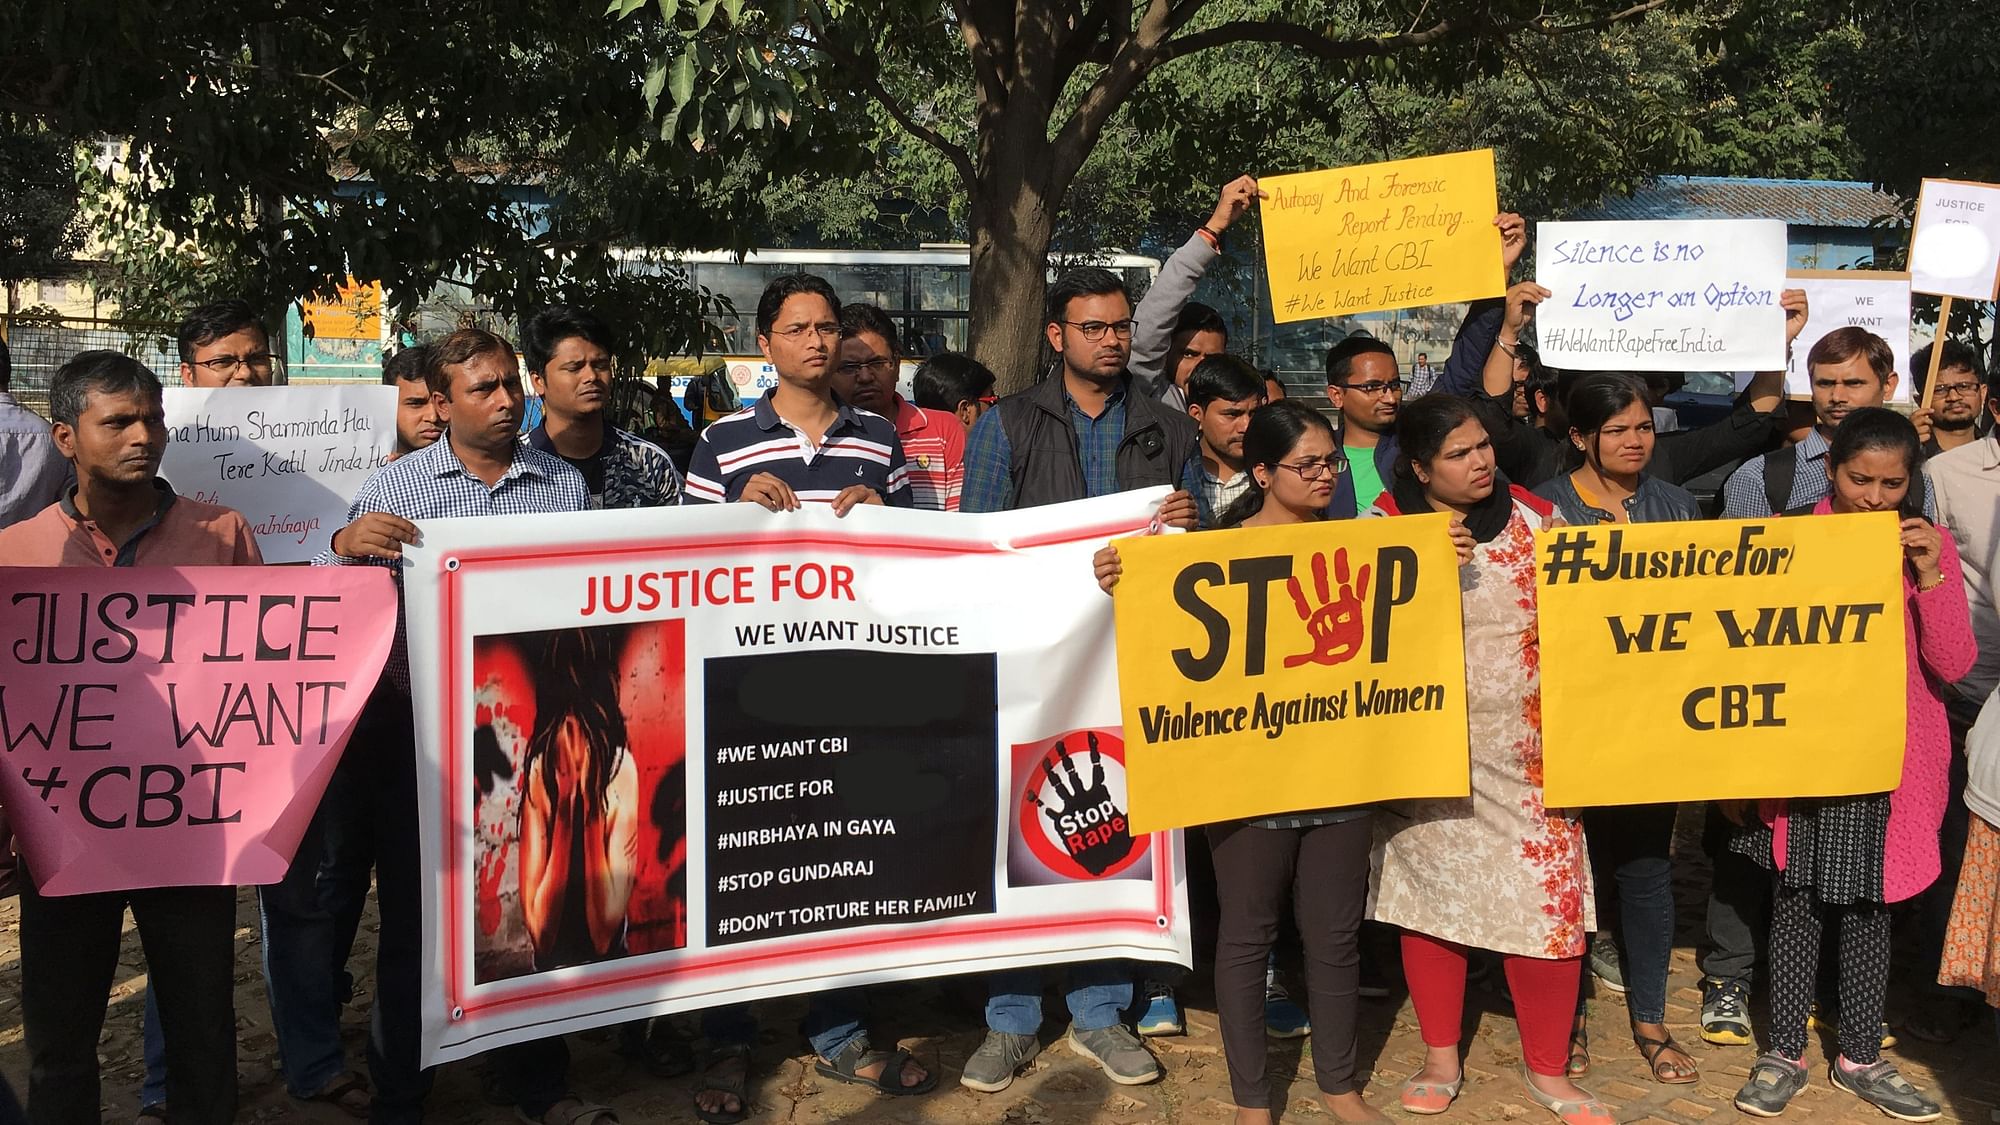 Over 200 people, a majority of them native to Gaya, but residents of Bengaluru, raised their voices against the rape and death of a 16-year-old girl in Bihar.